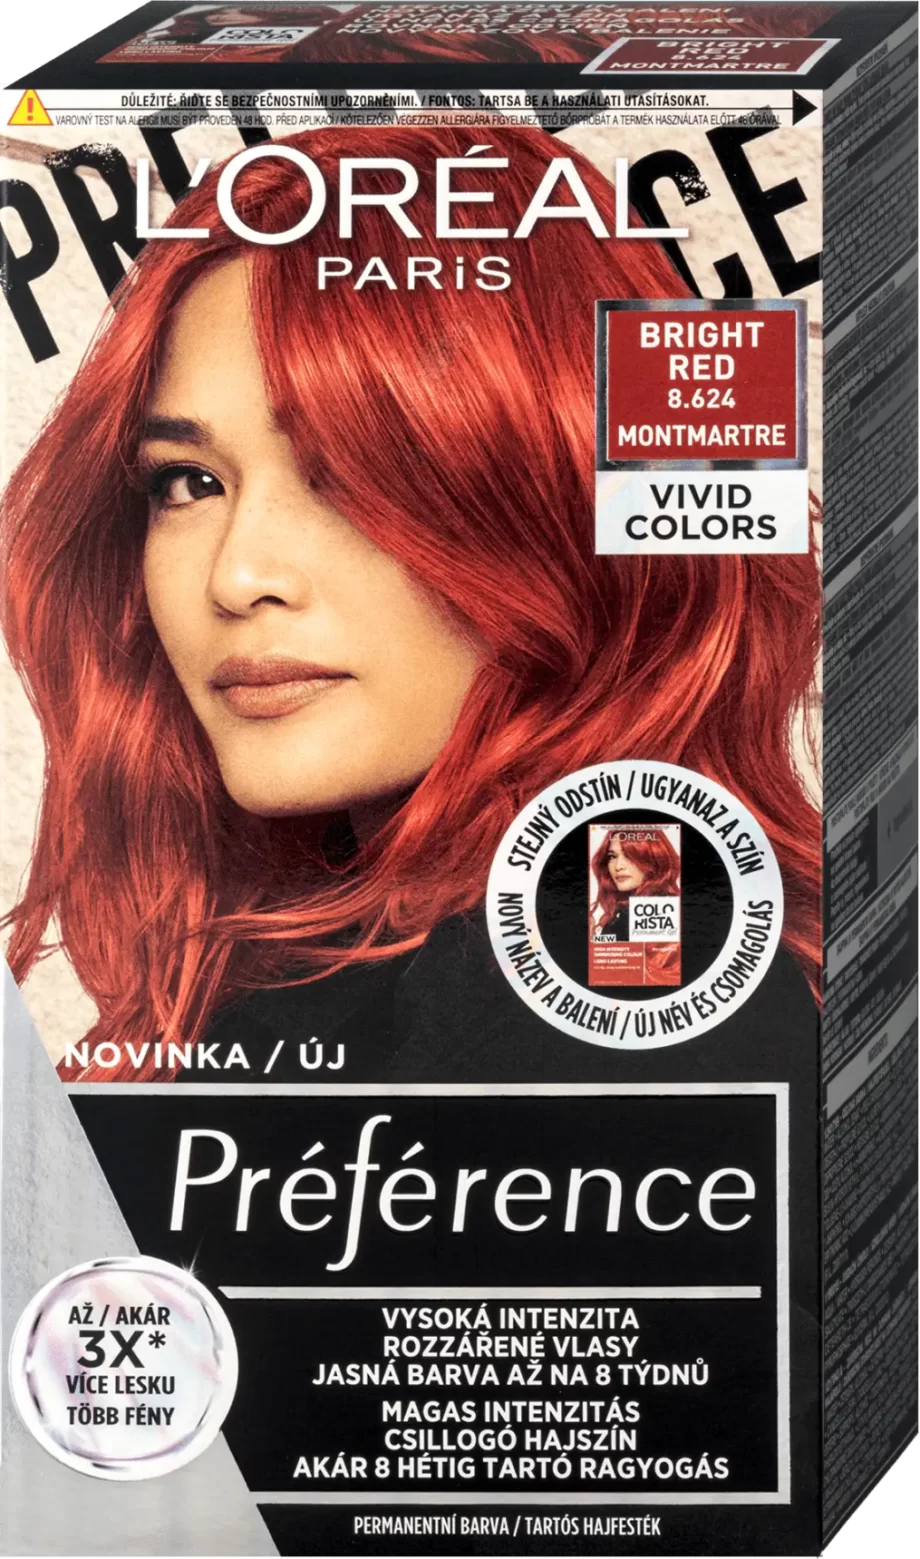 loreal paris preference 8.624 bright red permanent hair color